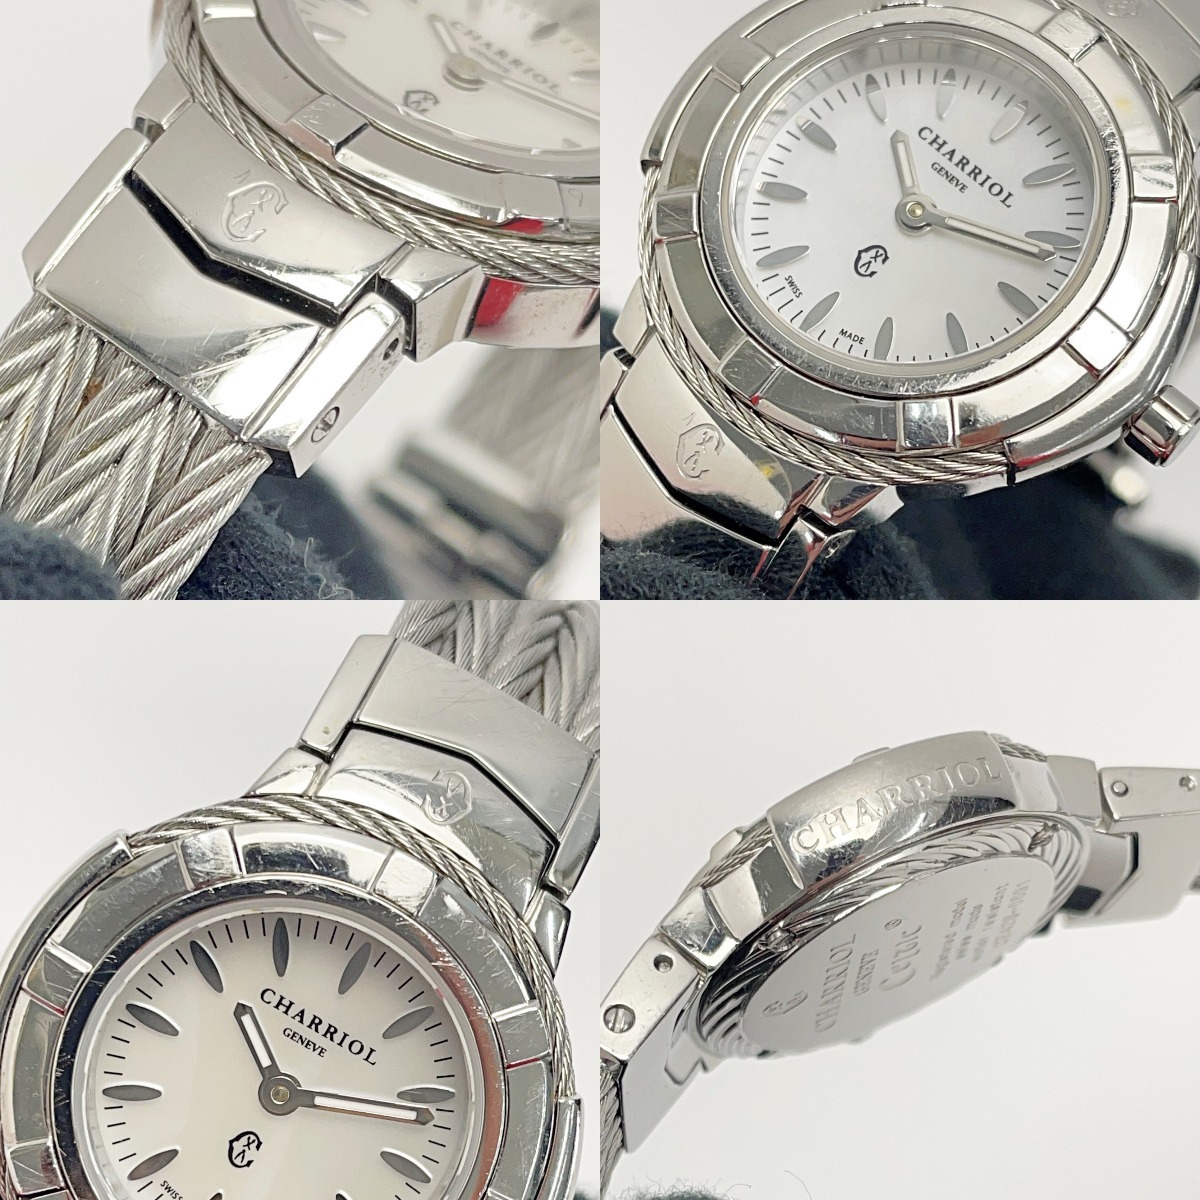 ** PHILIPPE CHARRIOLkerutikCE426-0691 silver quartz shell face lady's wristwatch a little scratch . dirt equipped 